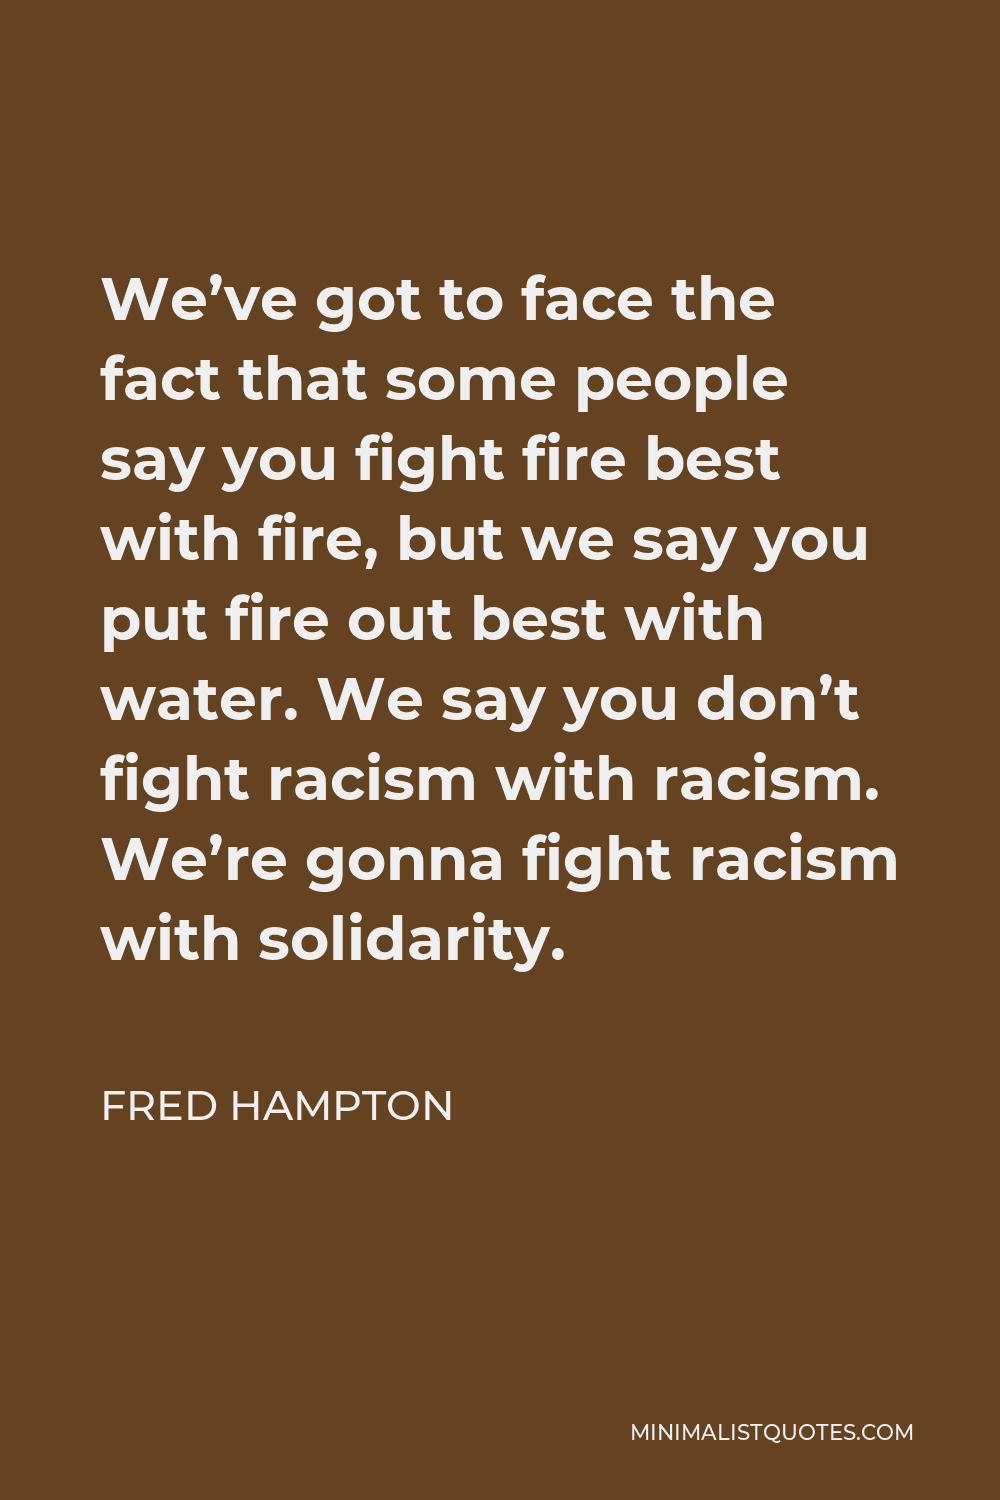 Fred Hampton Quote - We’ve got to face the fact that some people say you fight fire best with fire, but we say you put fire out best with water. We say you don’t fight racism with racism. We’re gonna fight racism with solidarity.